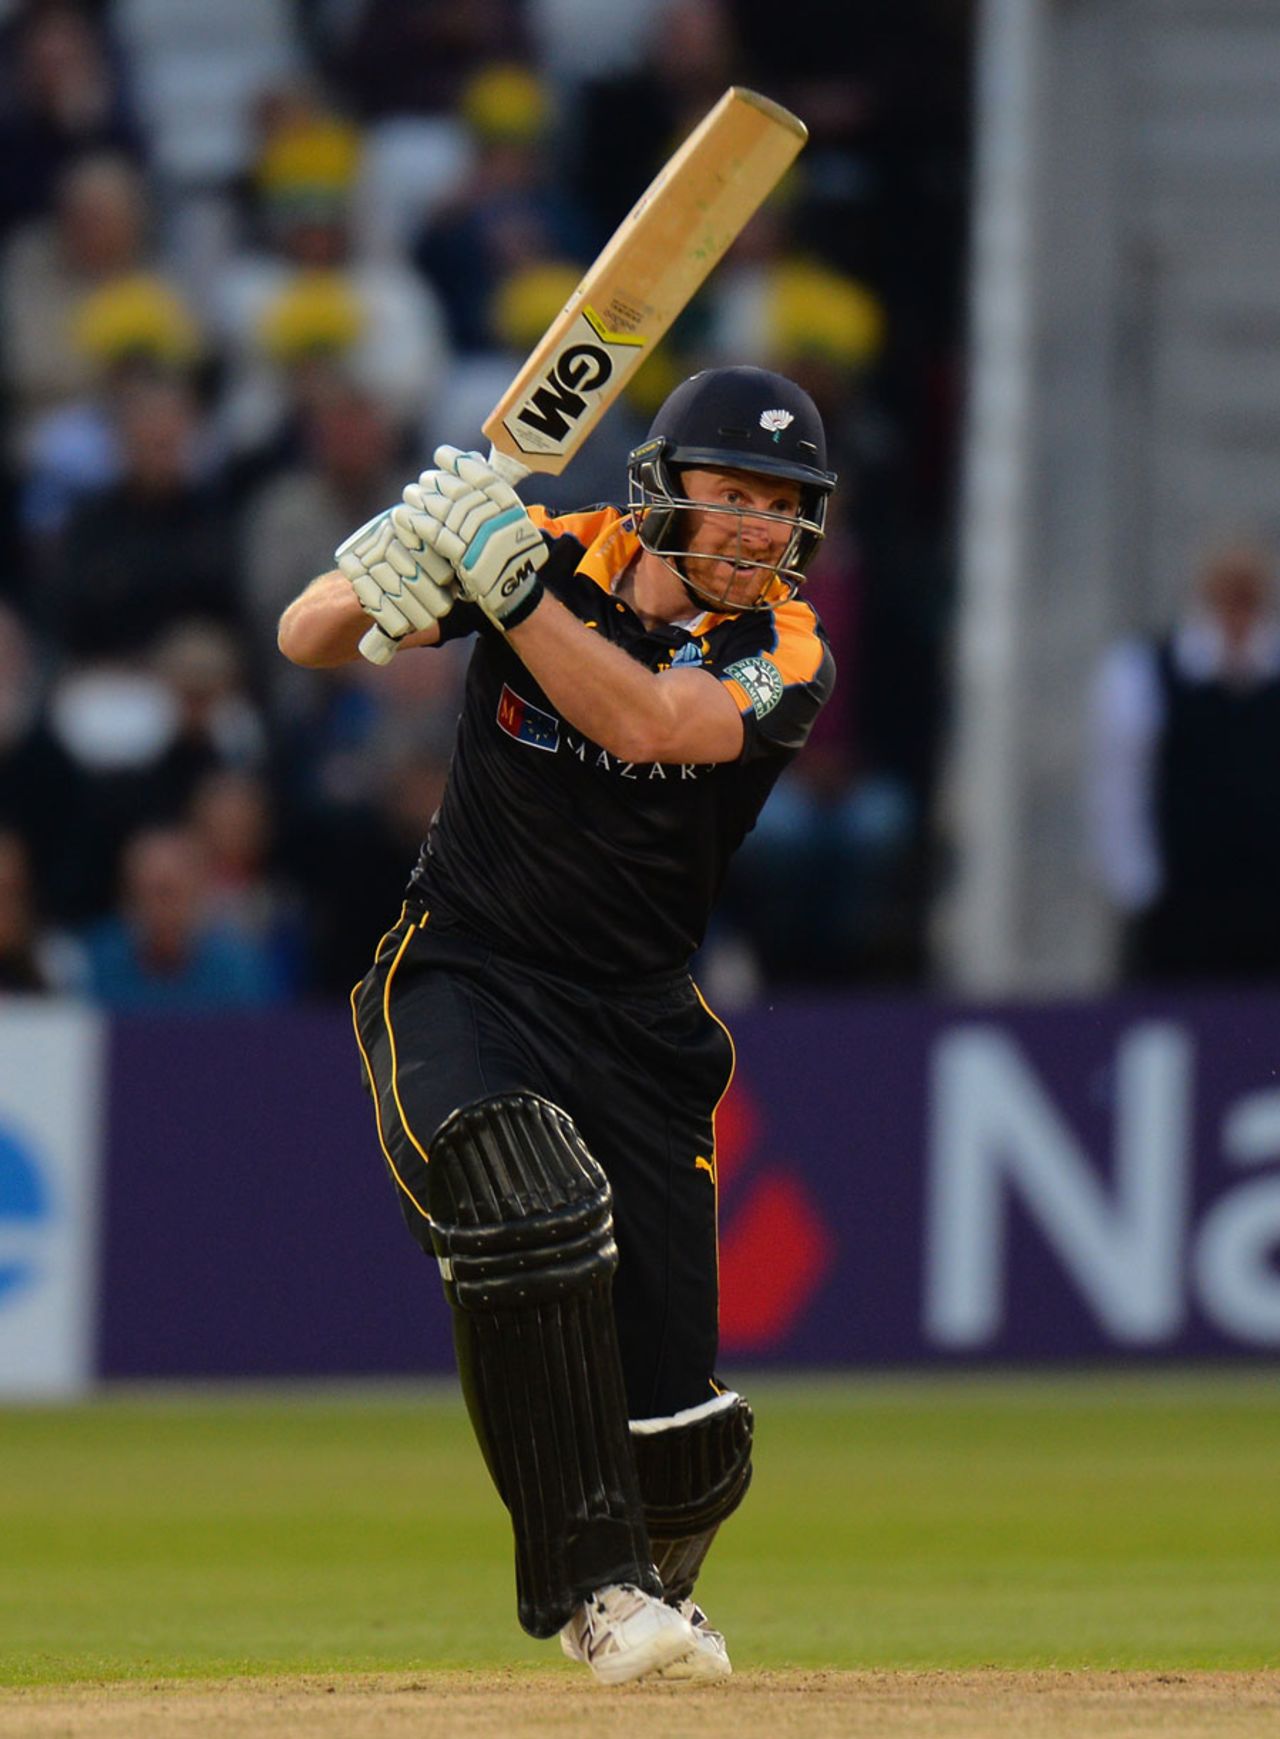 Andrew Gale made an unbeaten 68 off 55 balls, Nottinghamshire v Yorkshire, NatWest T20 Blast, North Group, Trent Bridge, May 22, 2015